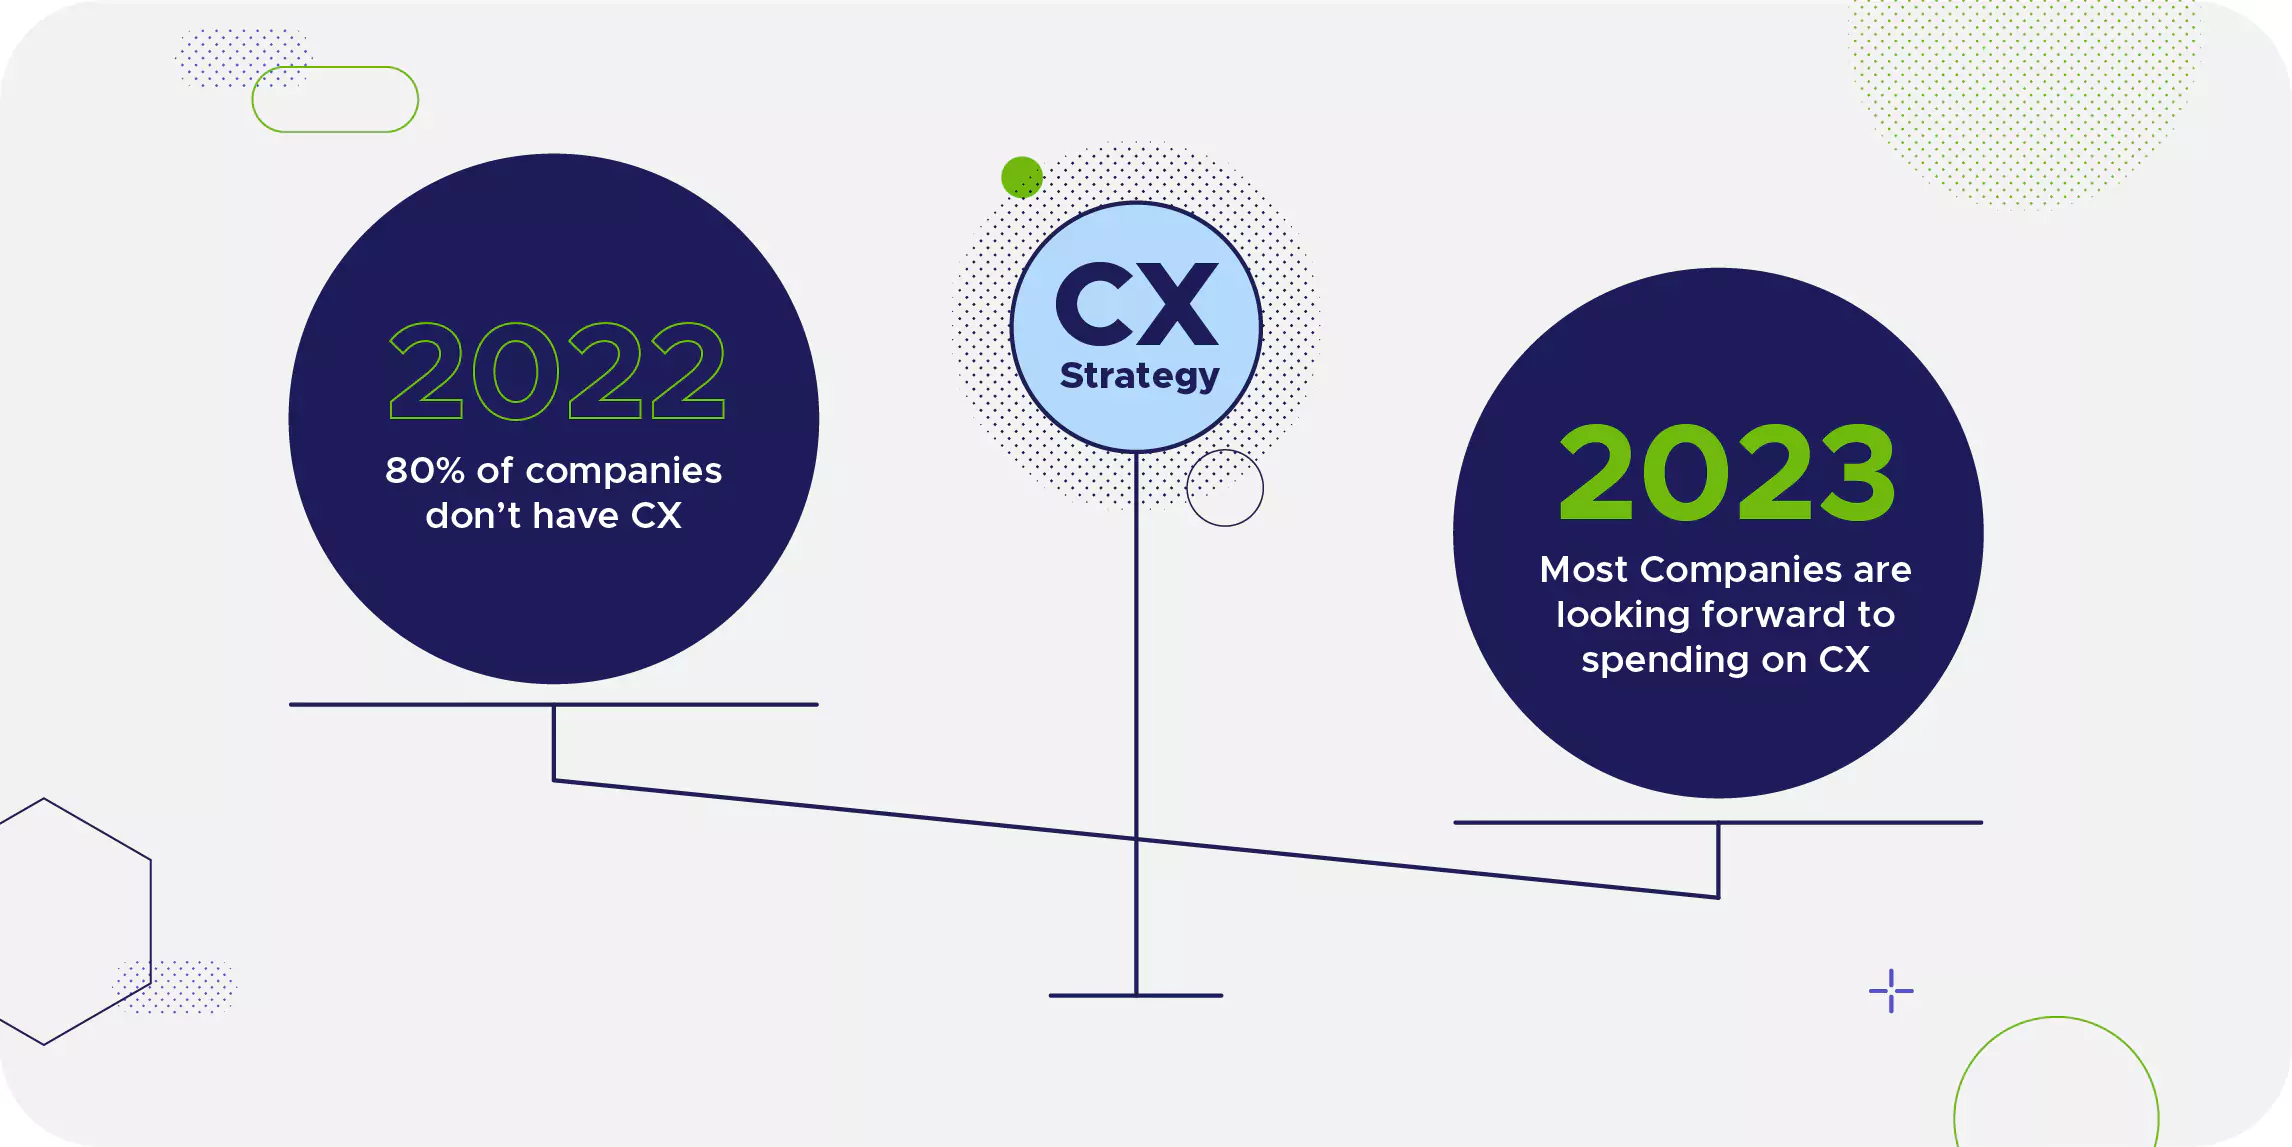 Strategy 2023: Most companies are looking forward to spending on CX